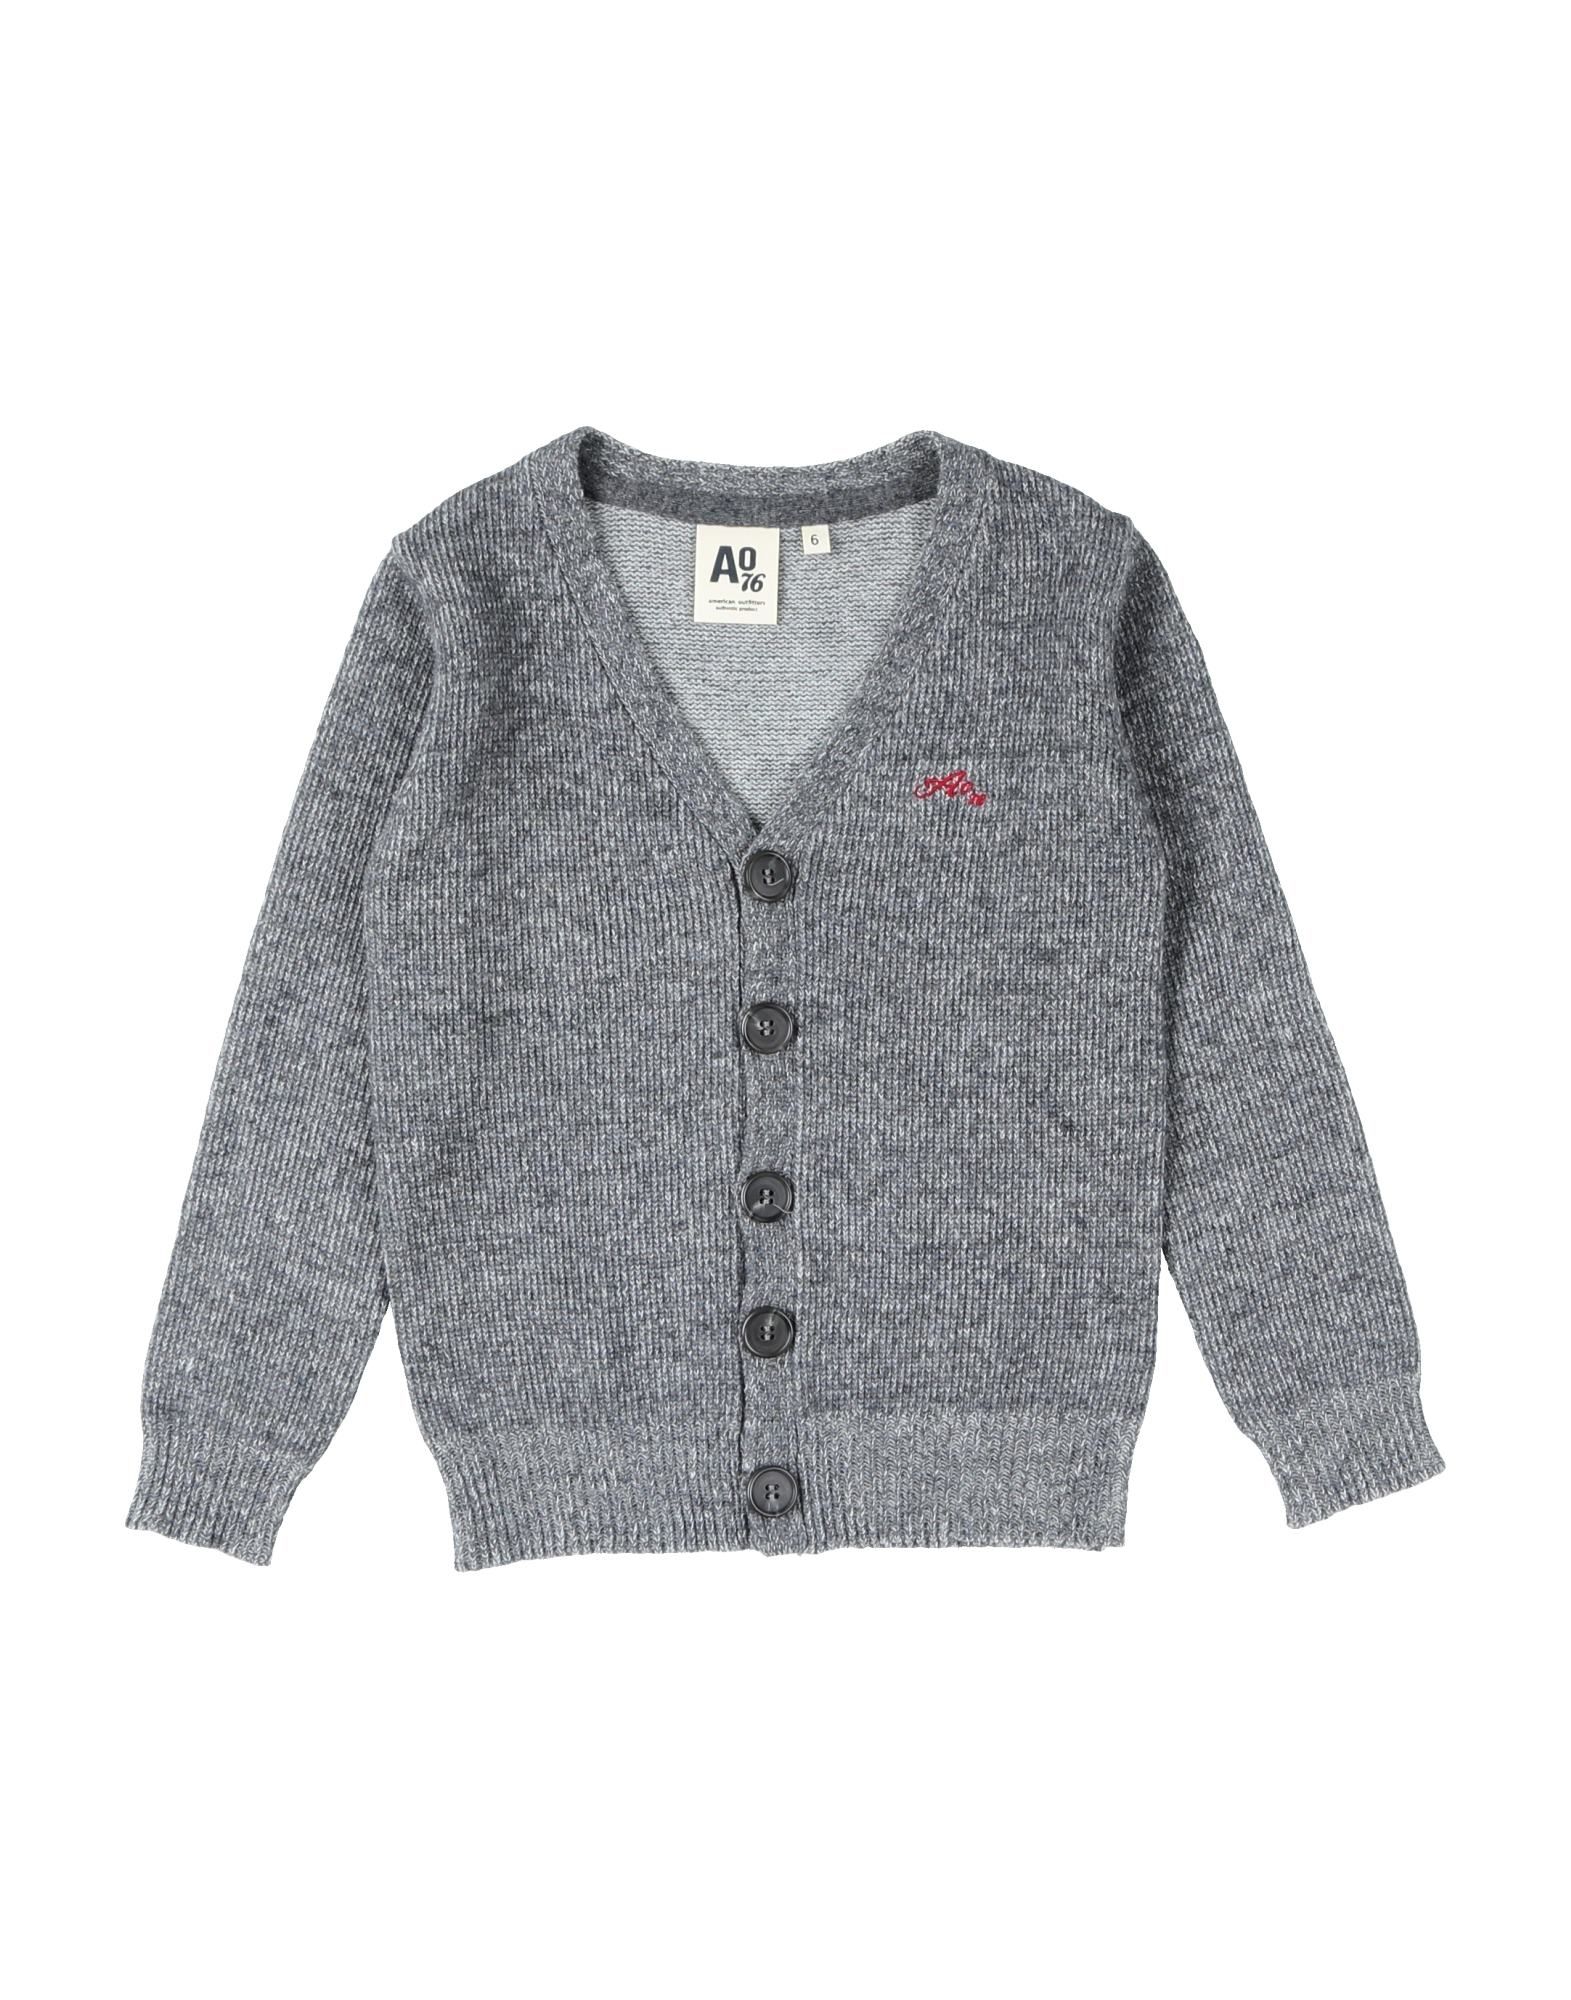 American Outfitters Kids' Cardigans In Grey